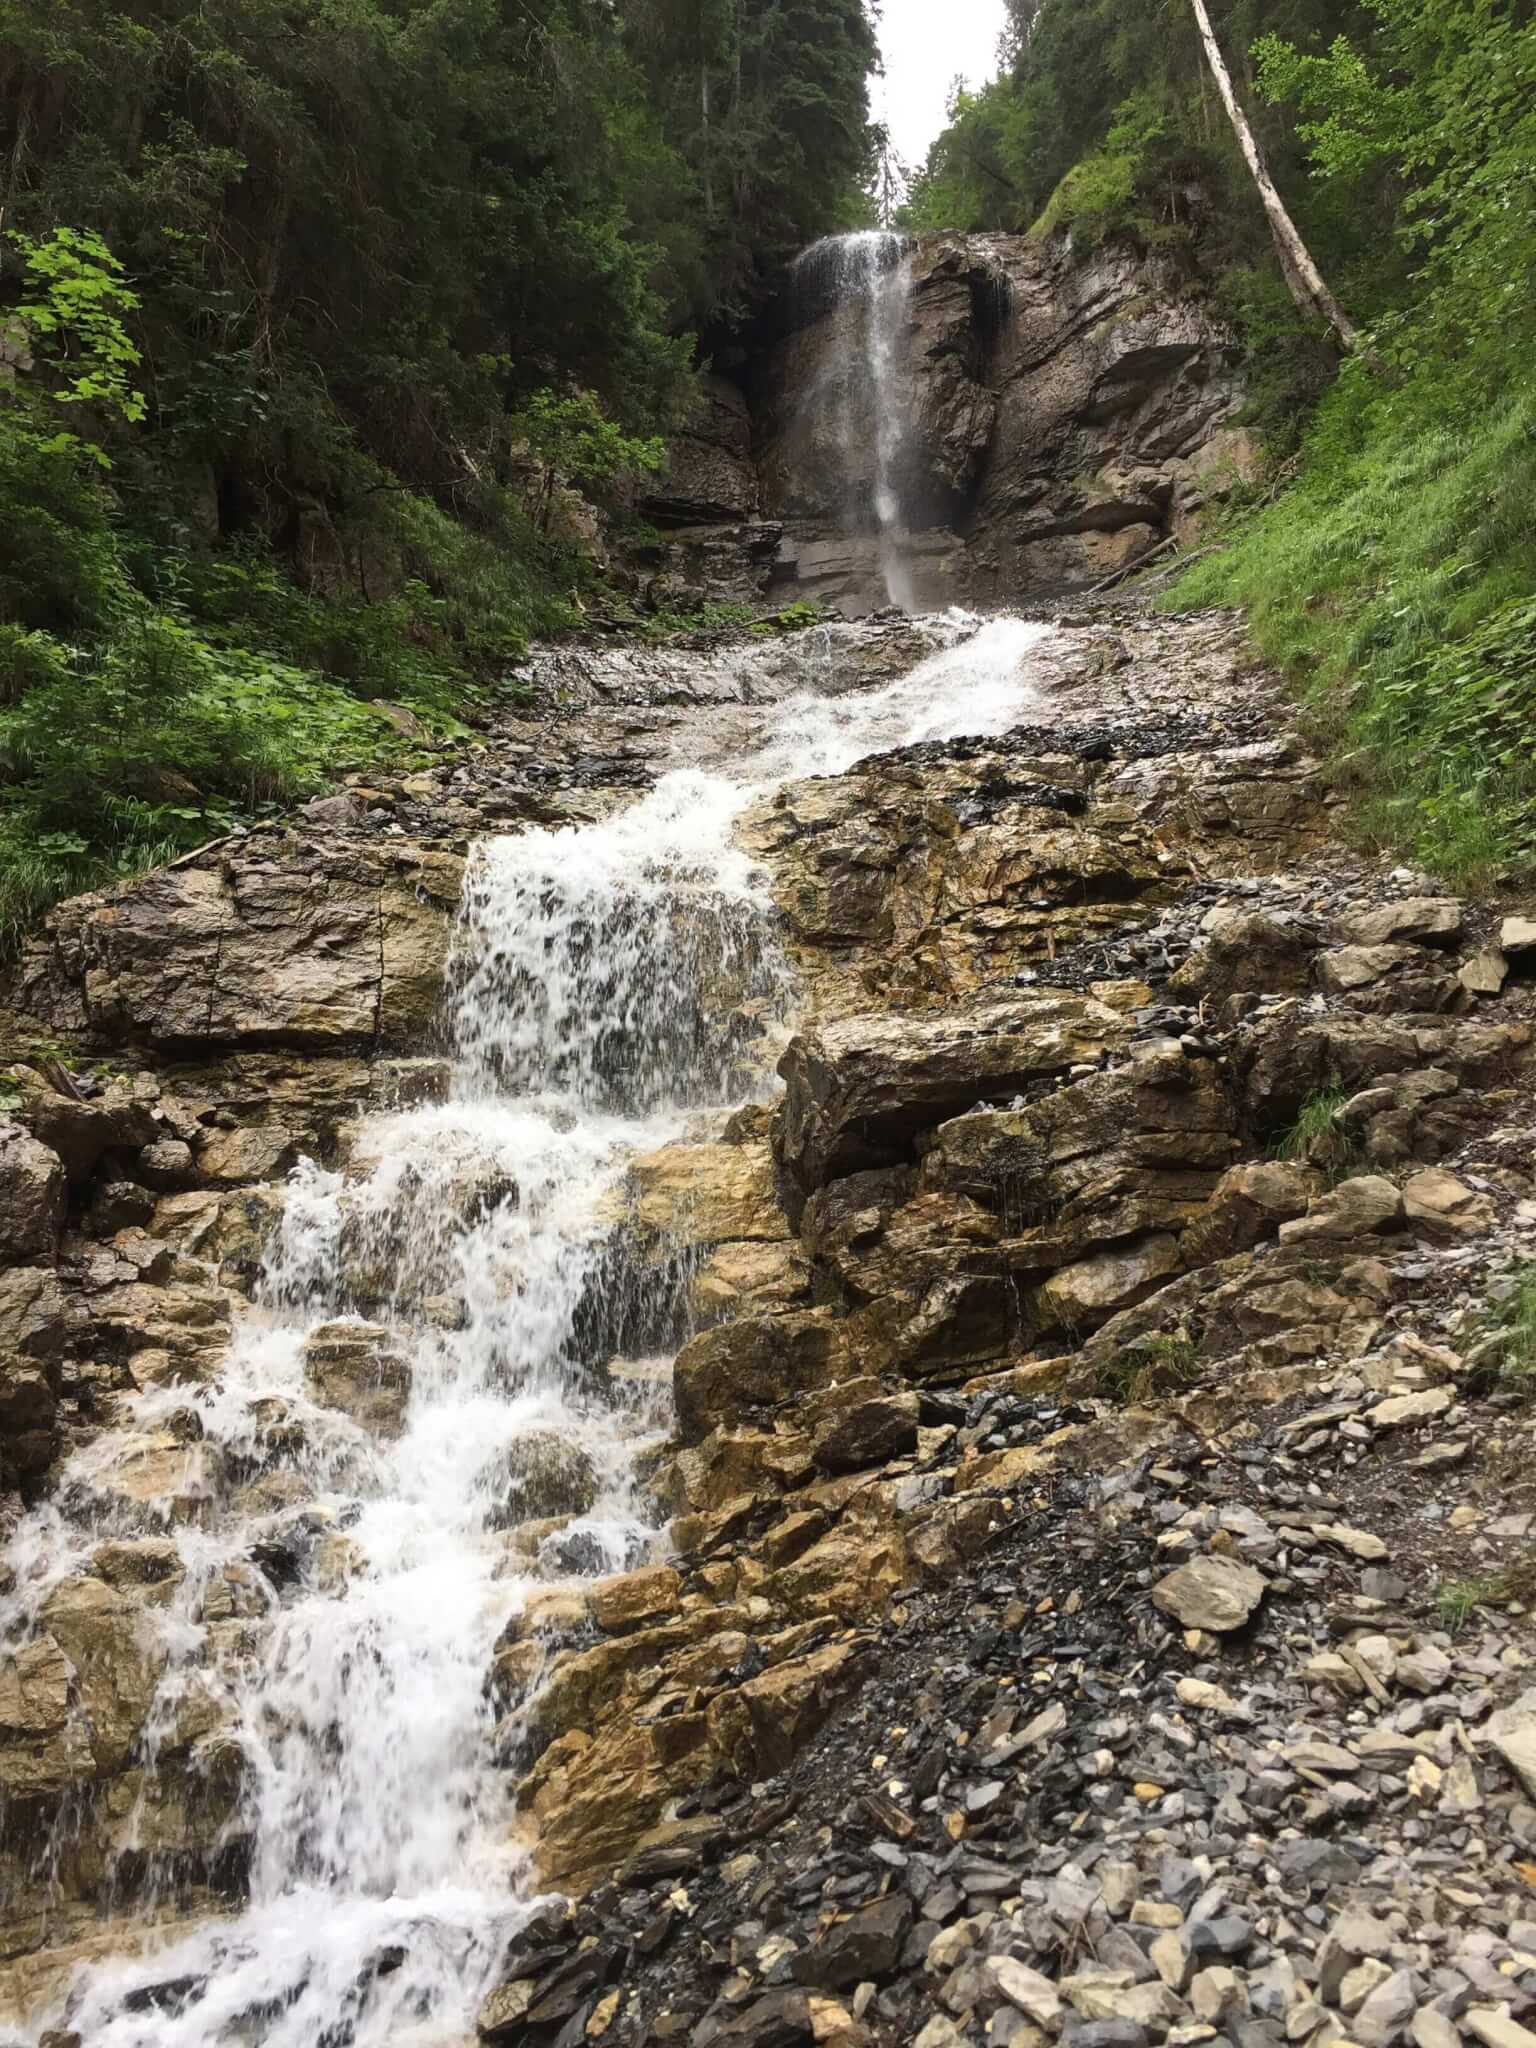 Another Waterfall